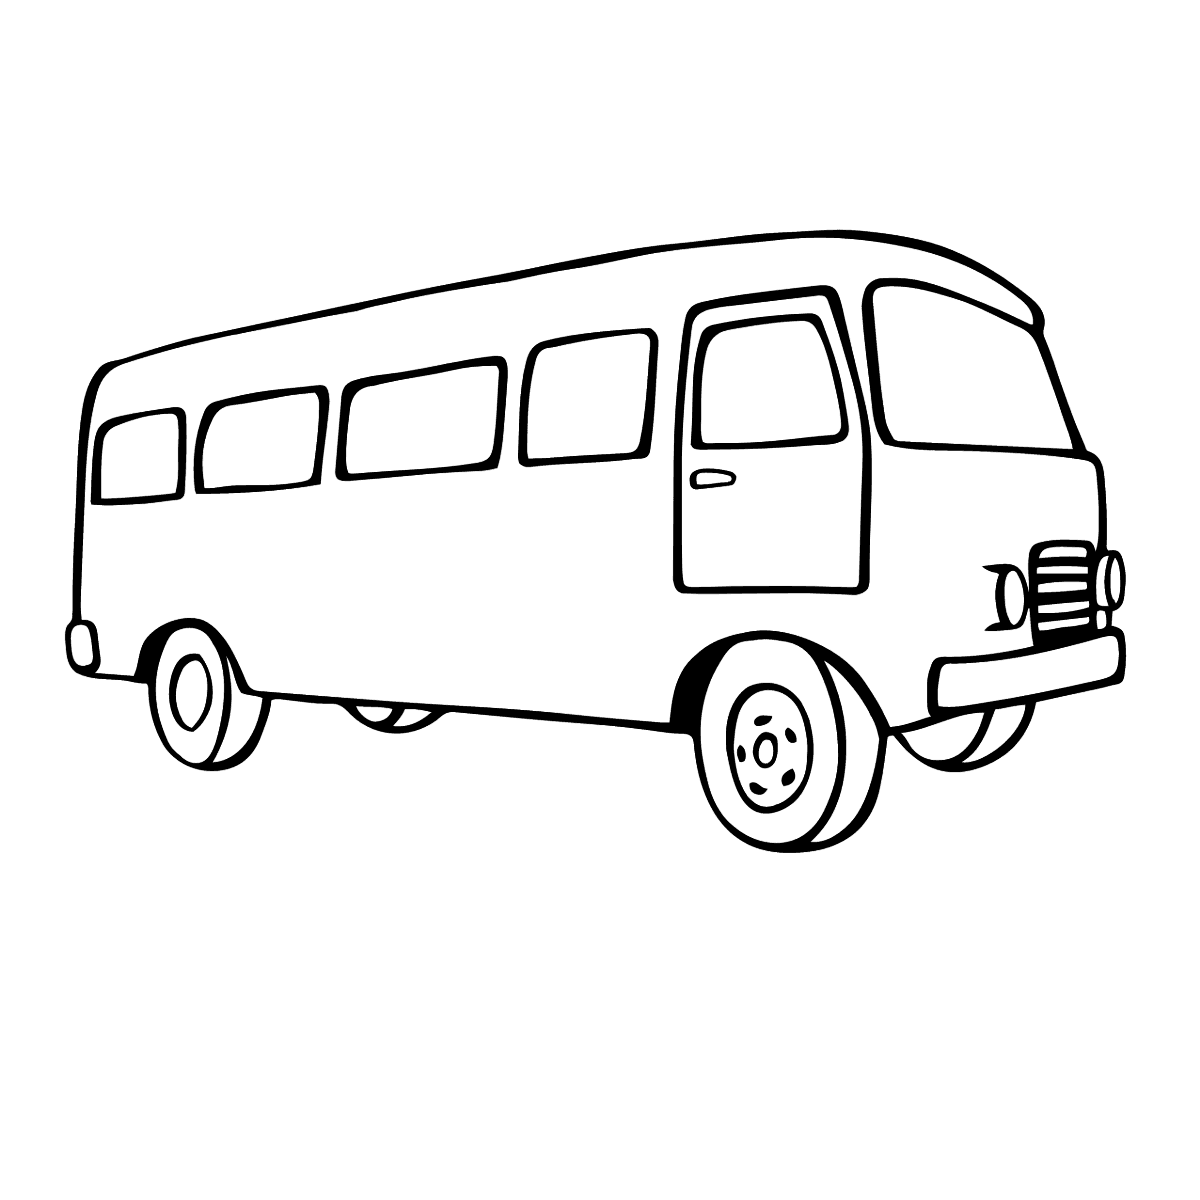 Coloring Page - A Traveling Bus - Print fo free!